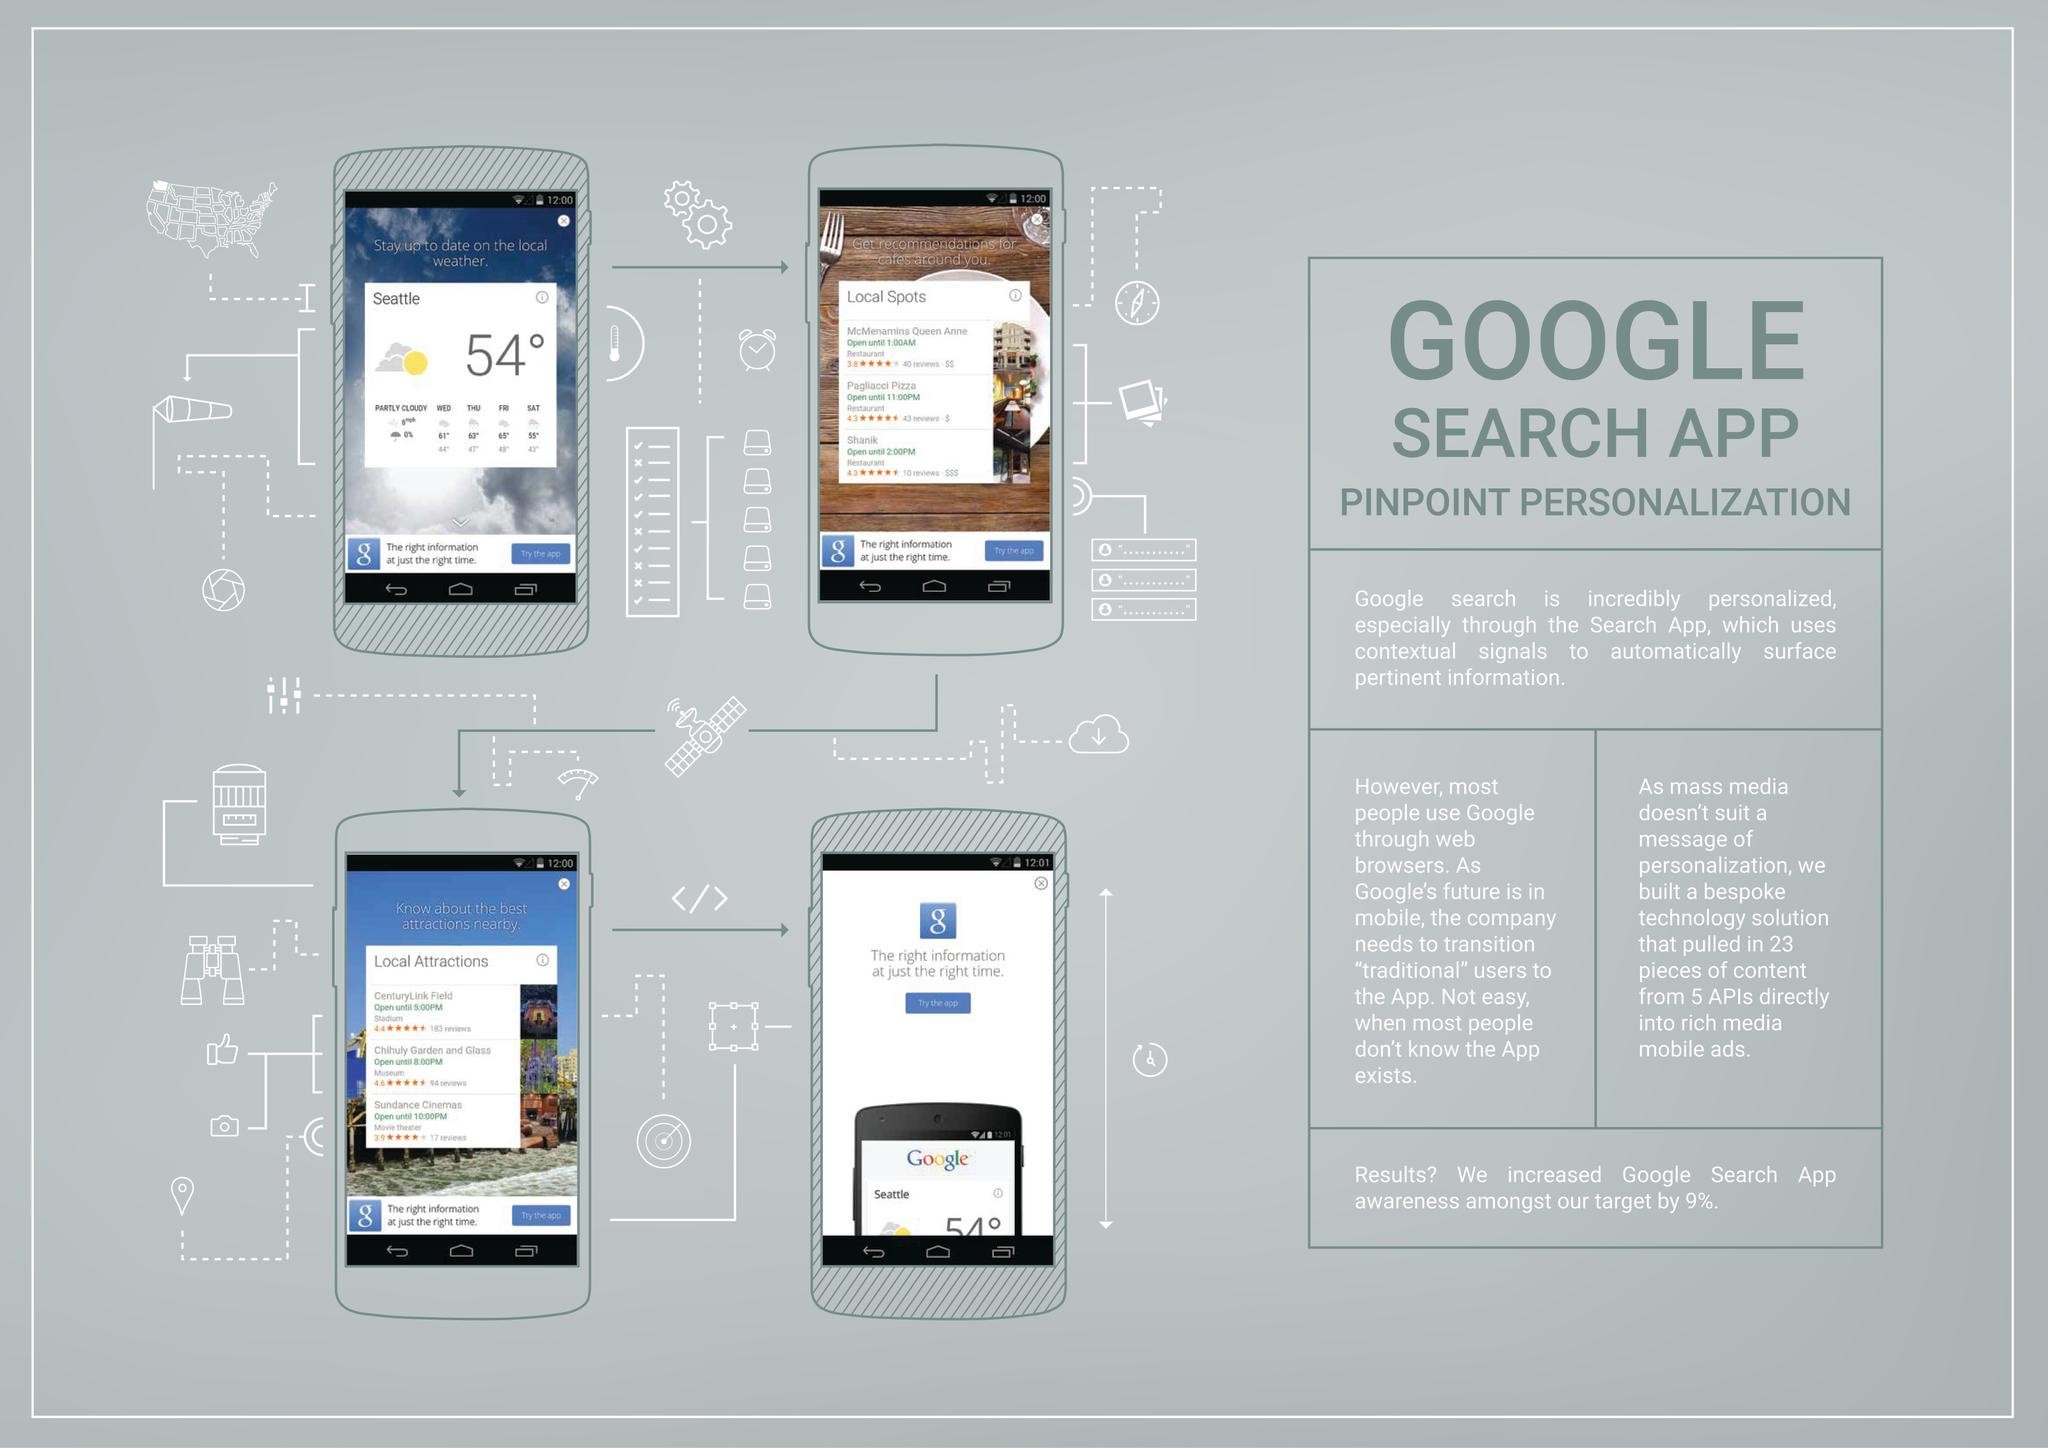 GOOGLE SEARCH APP - PERFECT PINPOINT PERSONALIZATION